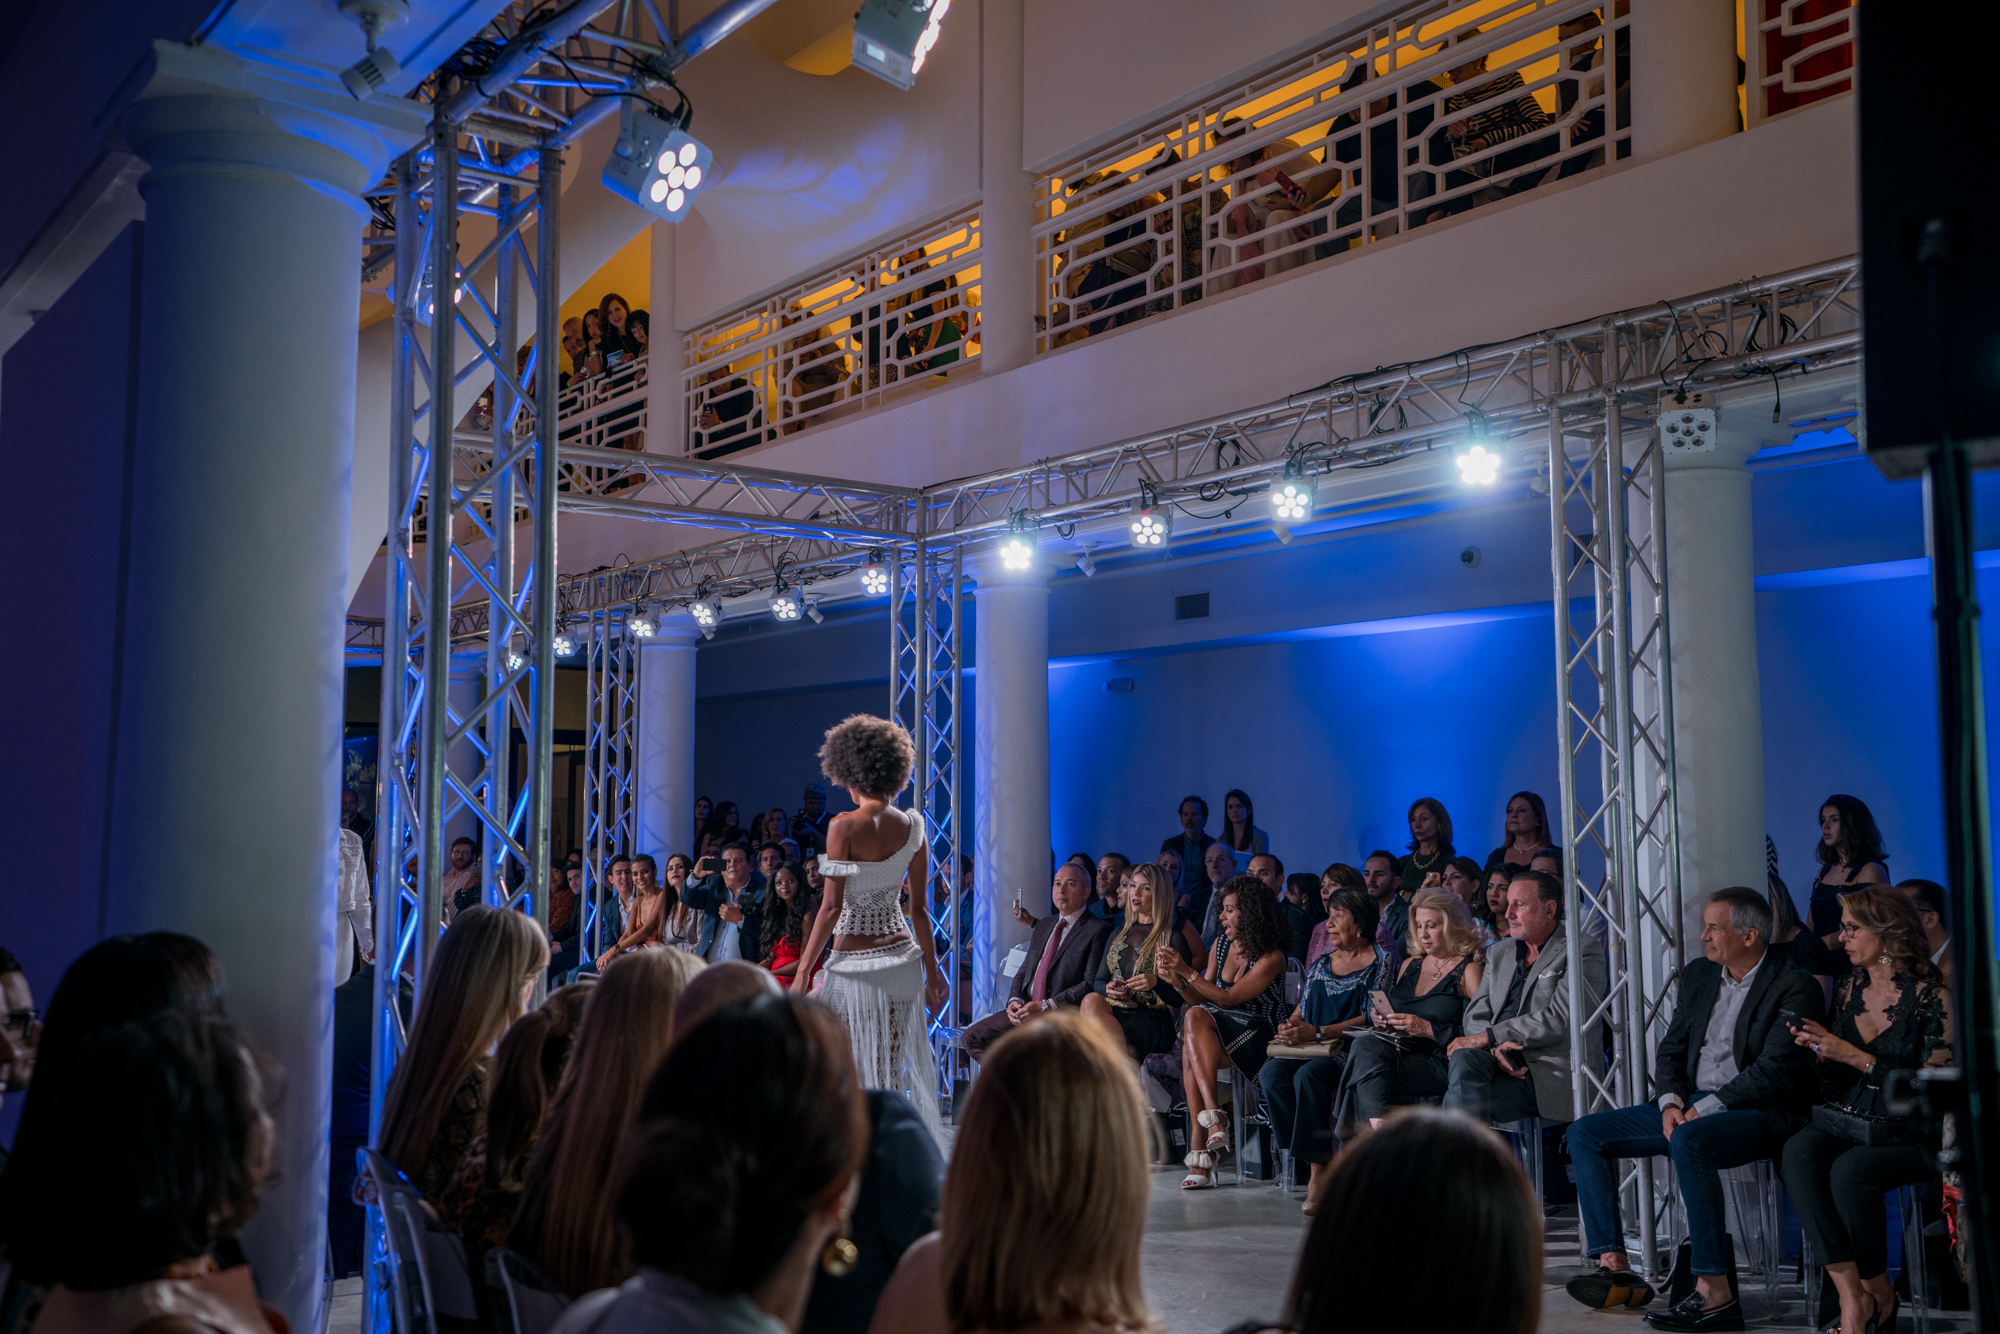 Dominican Republic, the capital of couture in the Caribbean, and the Dominican Republic Ministry of Tourism are partnering with the coveted Miami Fashion Week (MIAFW) as its guest country host for the fourth annual fashion week beginning Wednesday, May 29 through Sunday, June 2.
